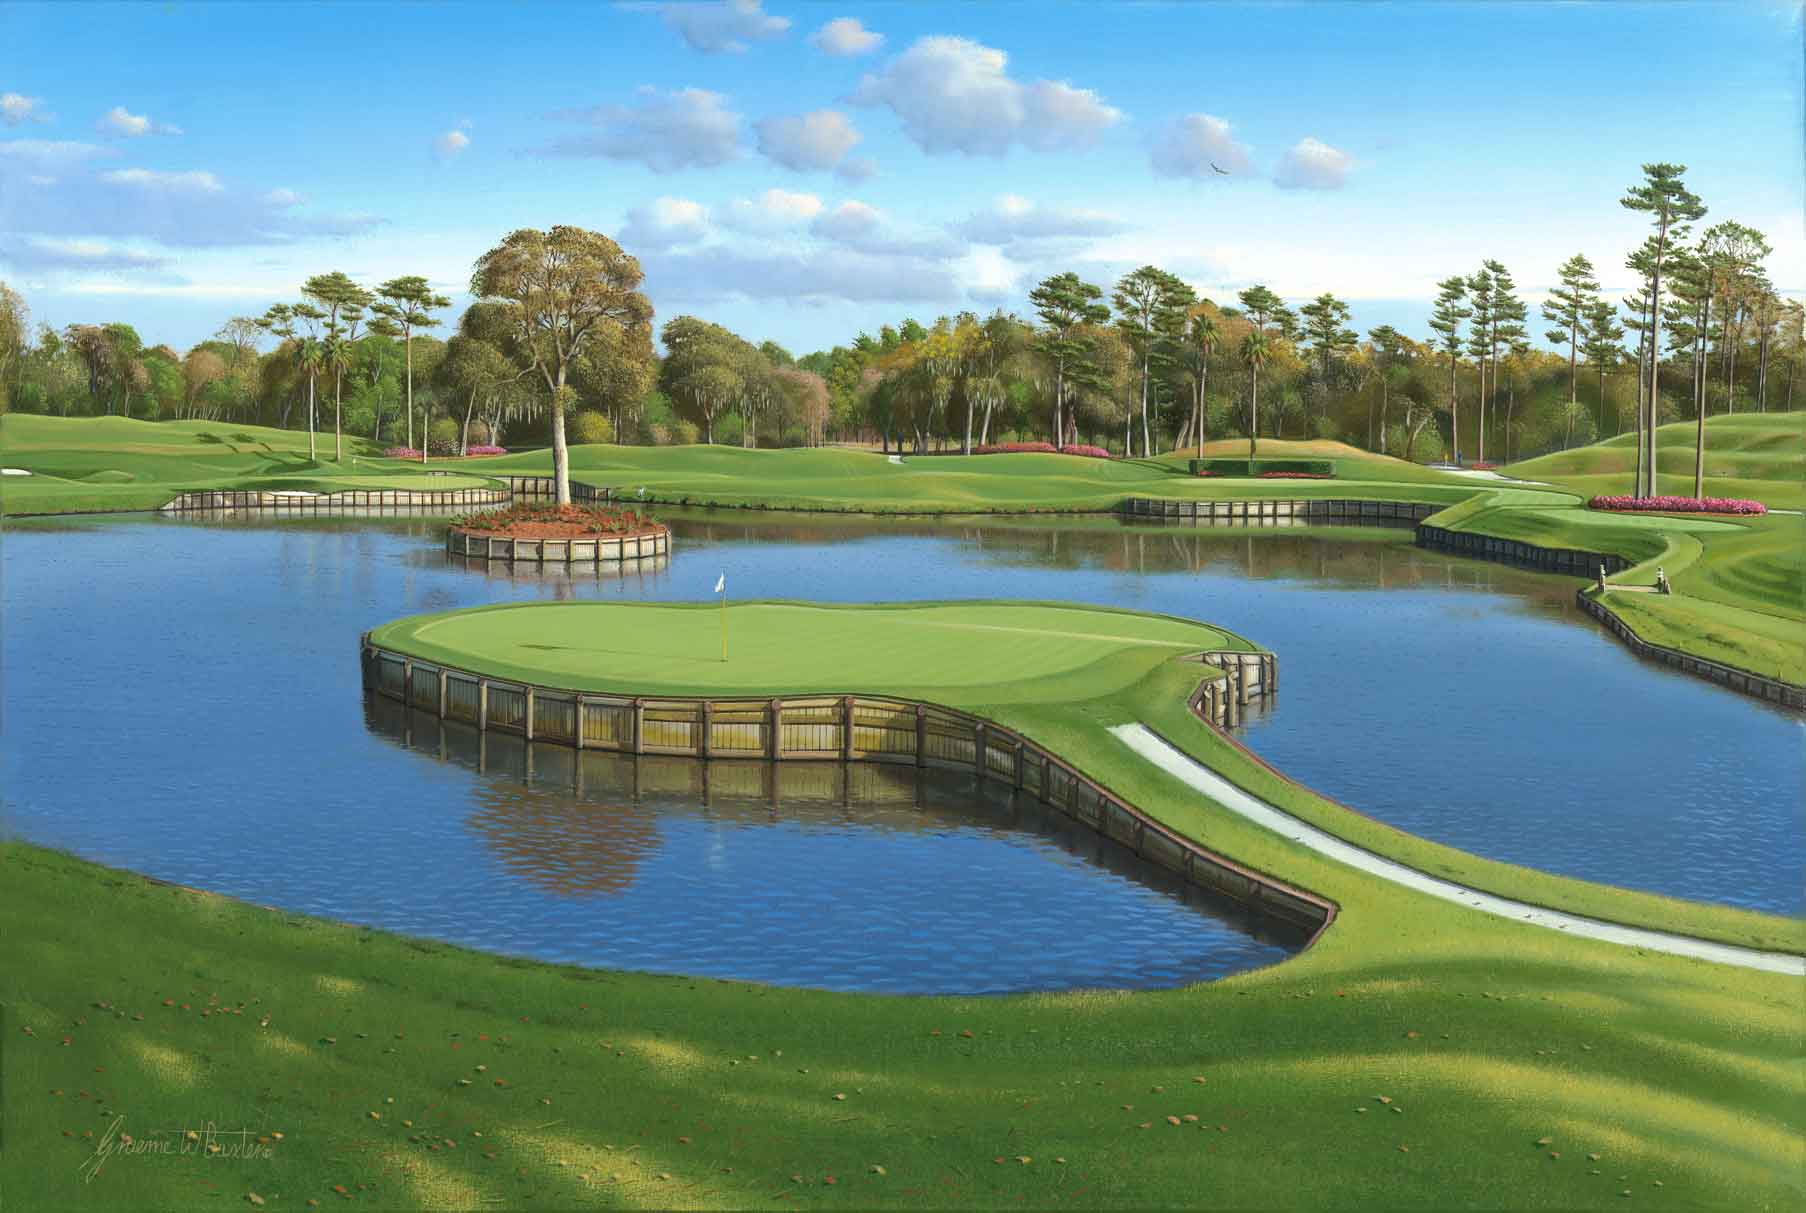 Famous Golf Holes 1645 Hd Wallpapers in Sports   Imagescicom